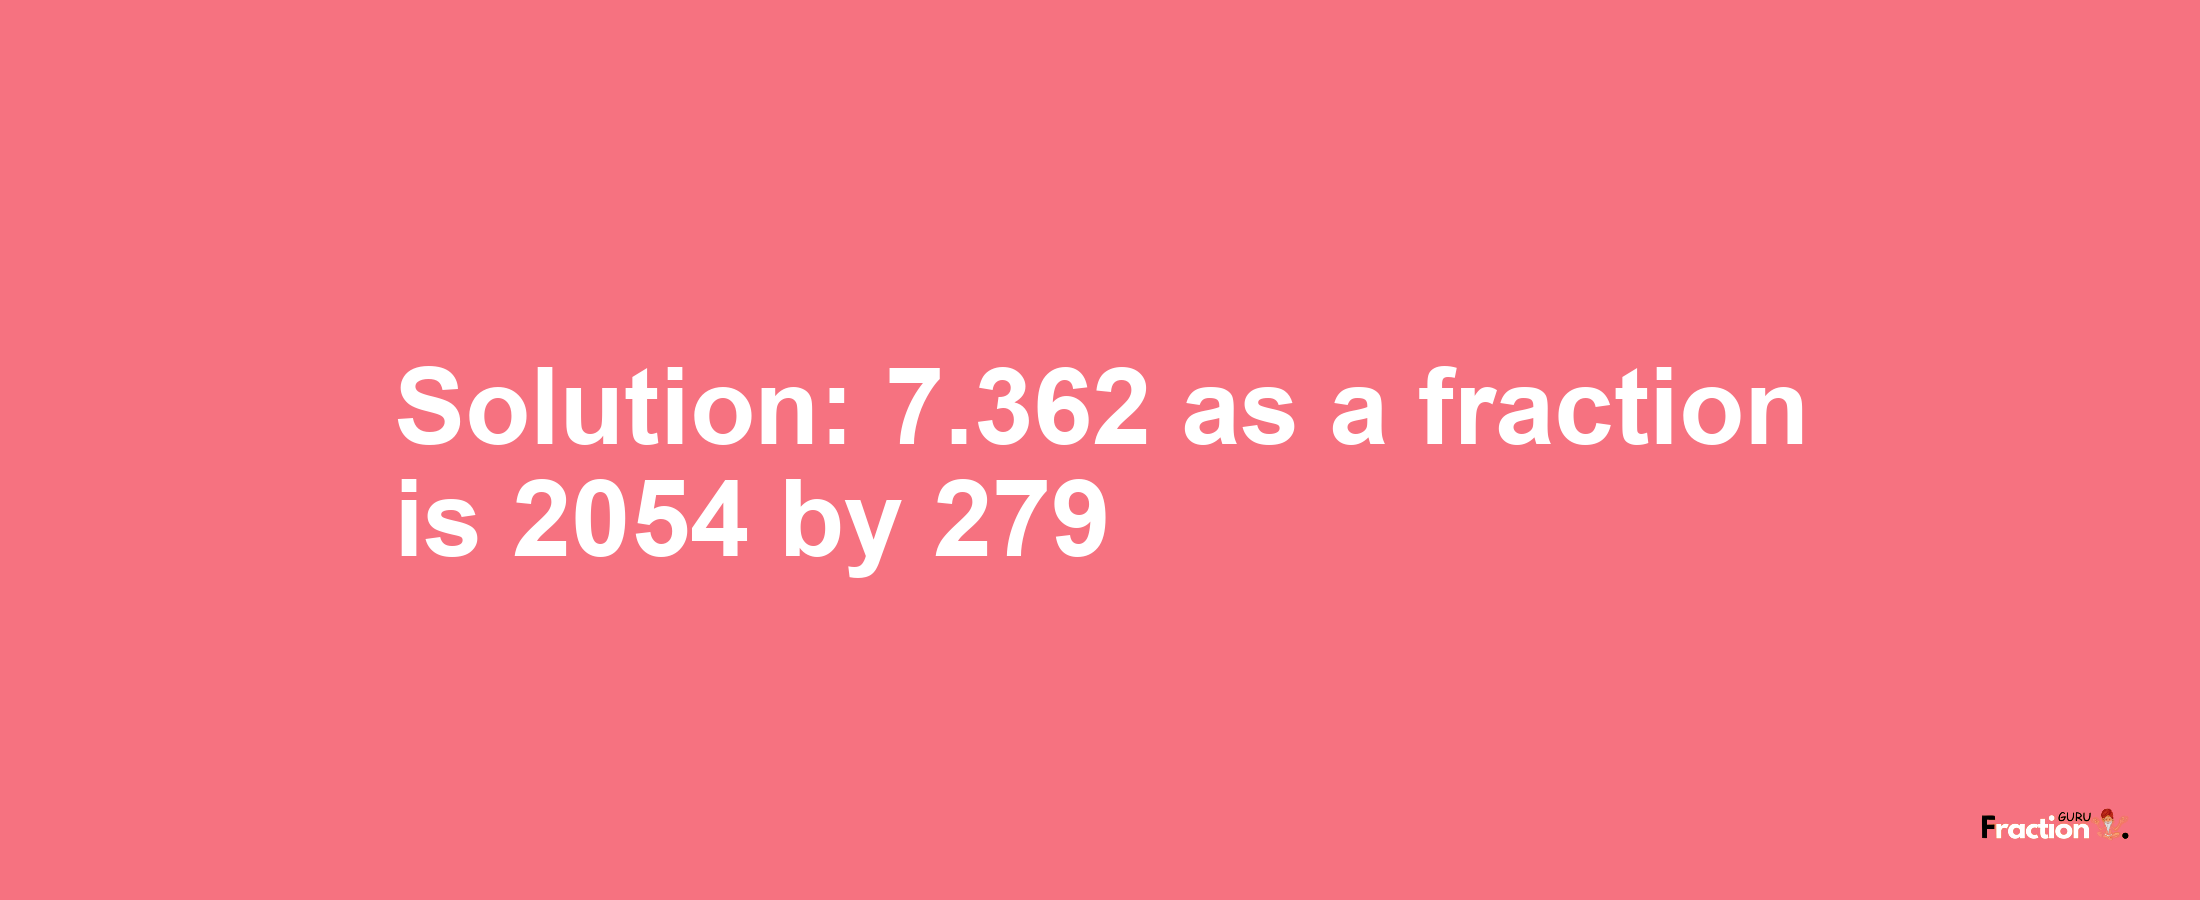 Solution:7.362 as a fraction is 2054/279